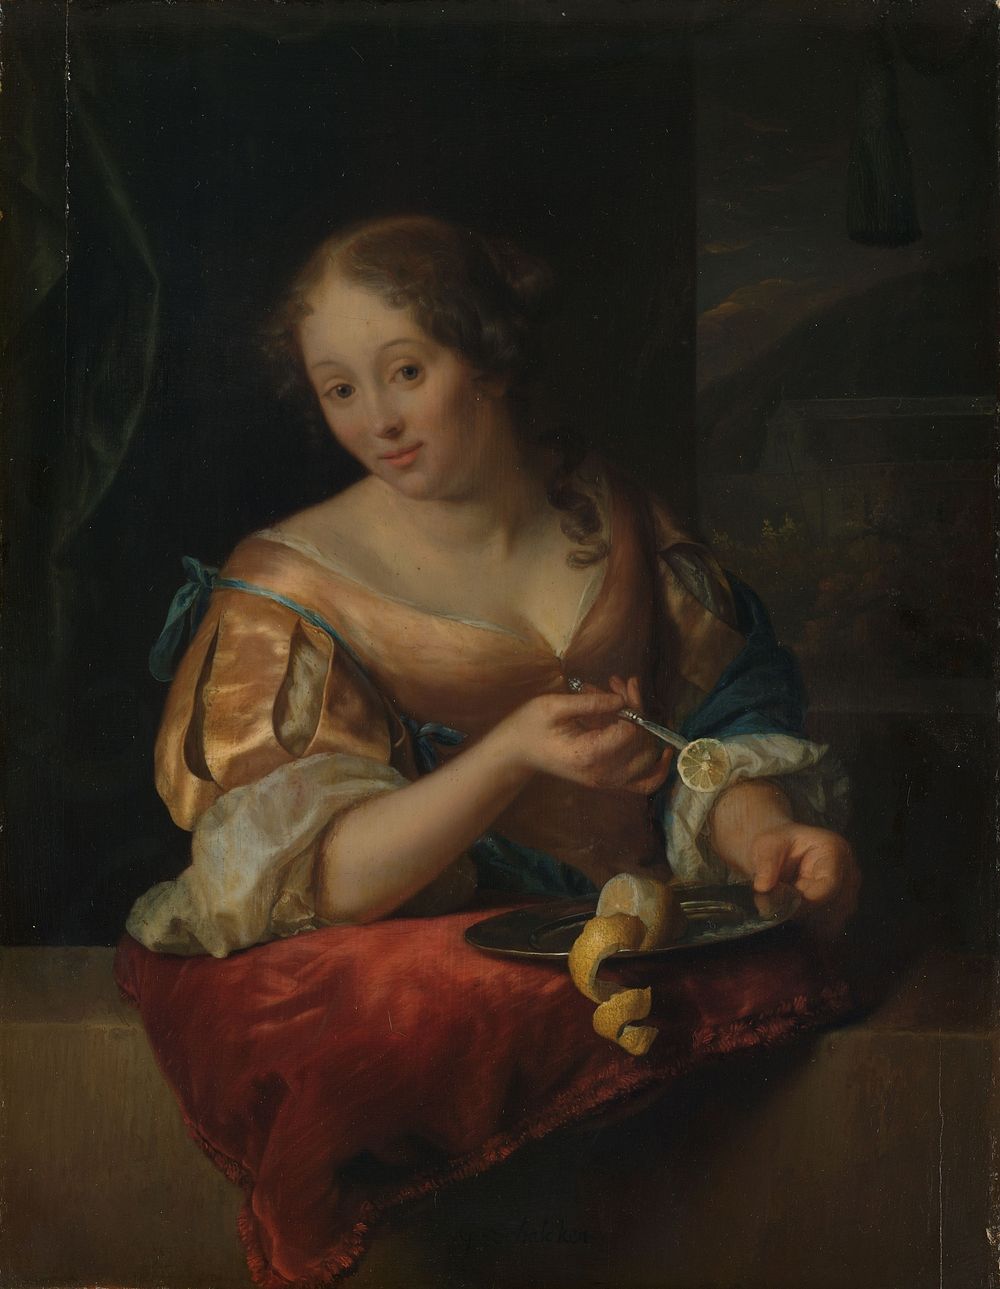 Young Woman with Lemon (1685 - 1690) by Godfried Schalcken